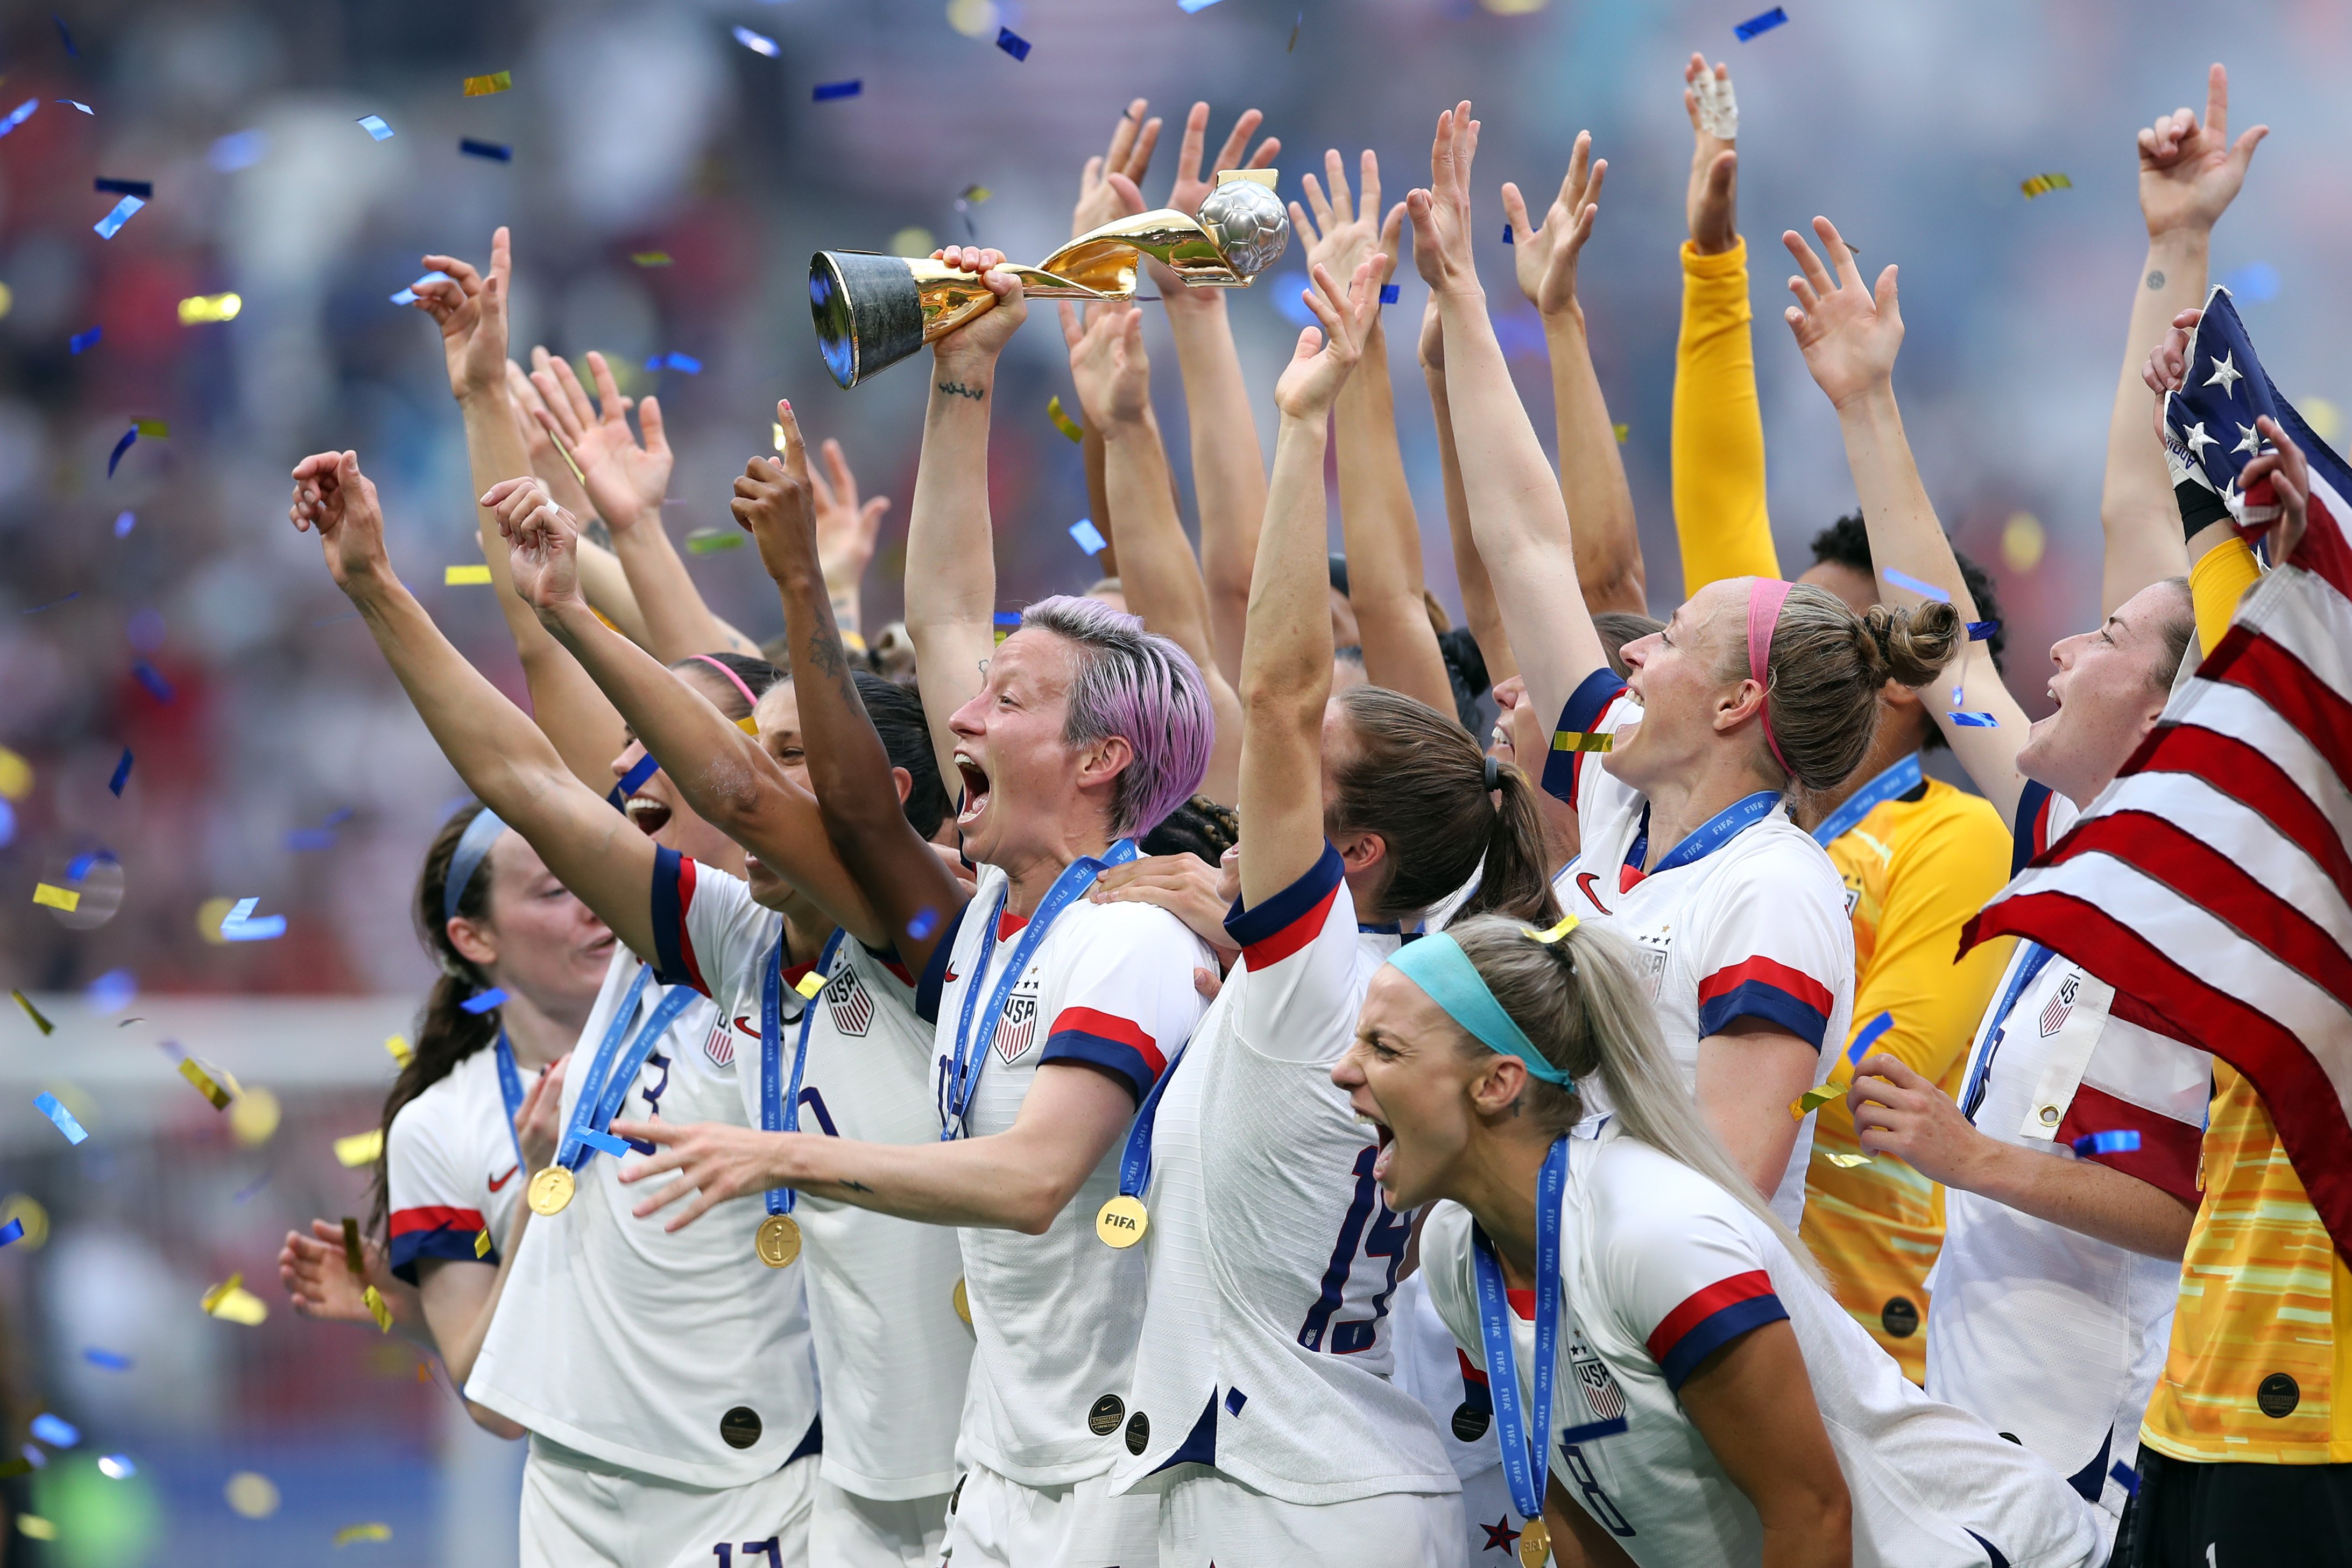 The US Women's Soccer Team celebrate after a match at the 2019 FIFA Women's World Cup | Photo: Getty Images